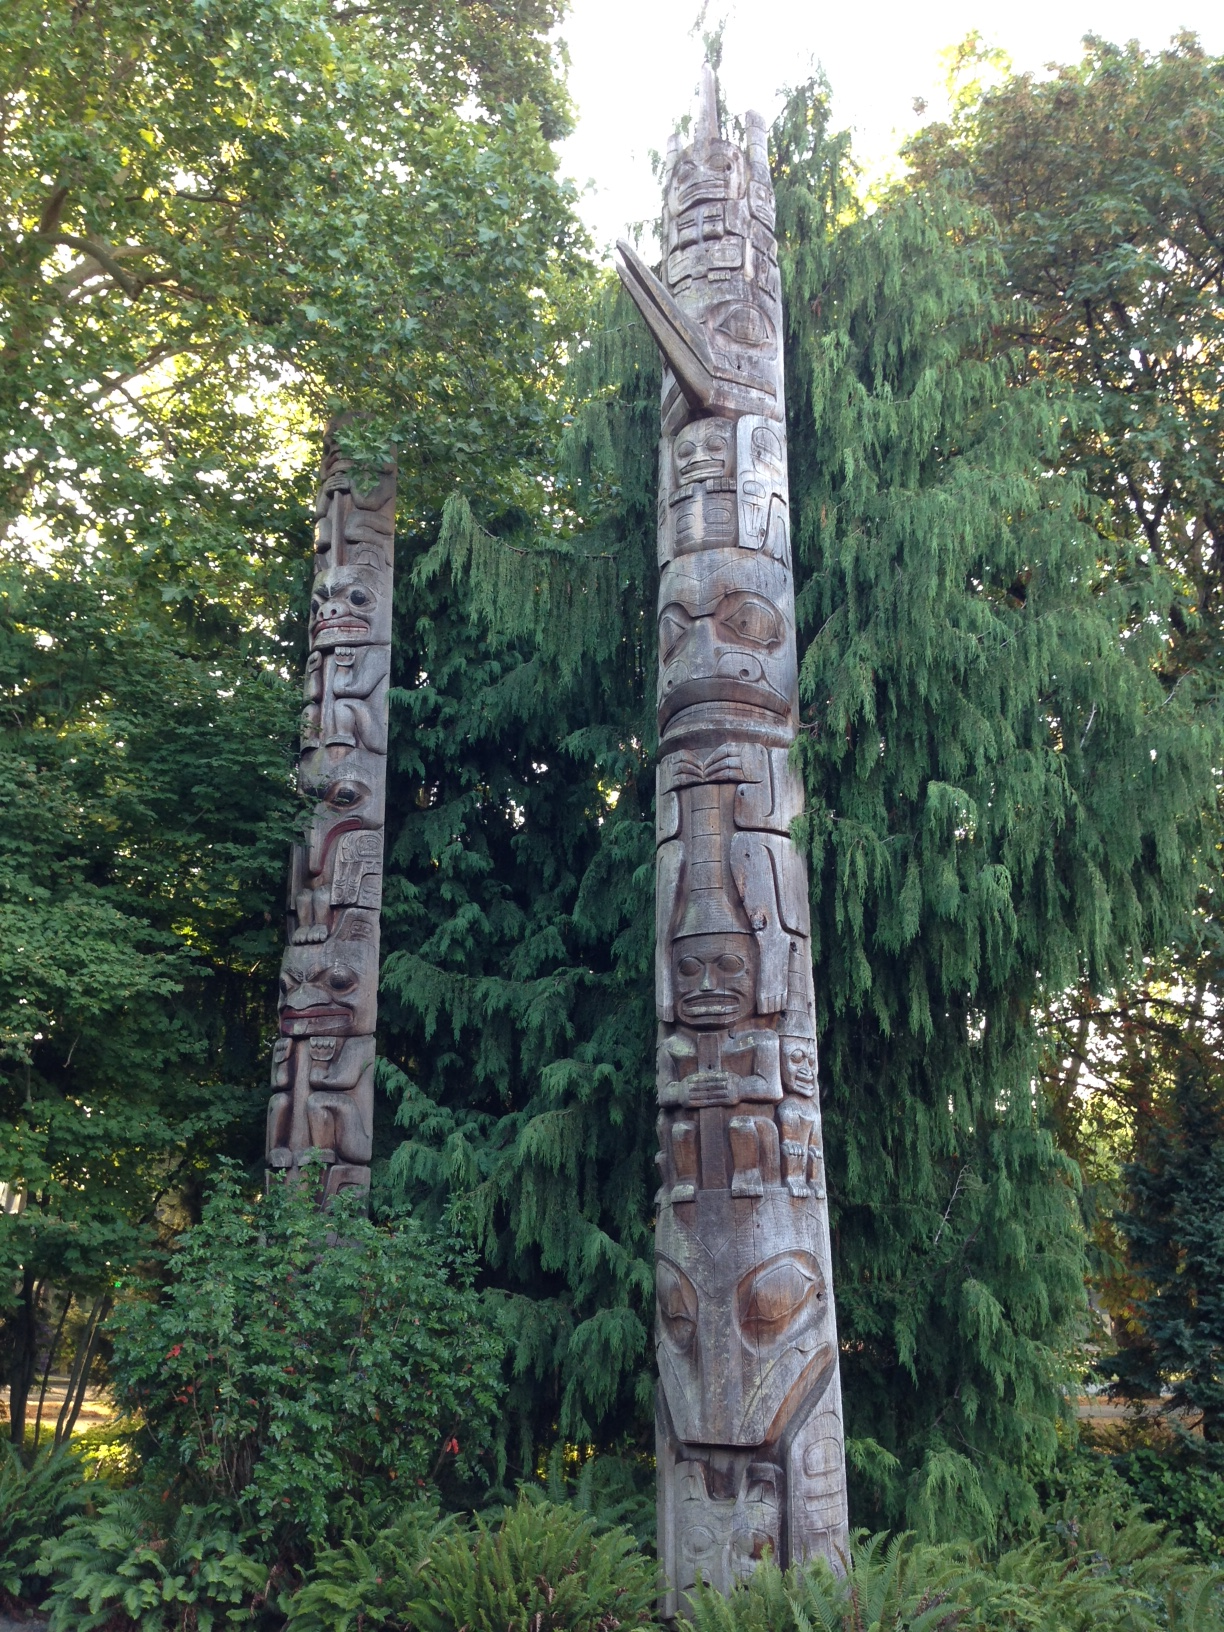 A thumbnail image of the totem poles at the Burke Museum.